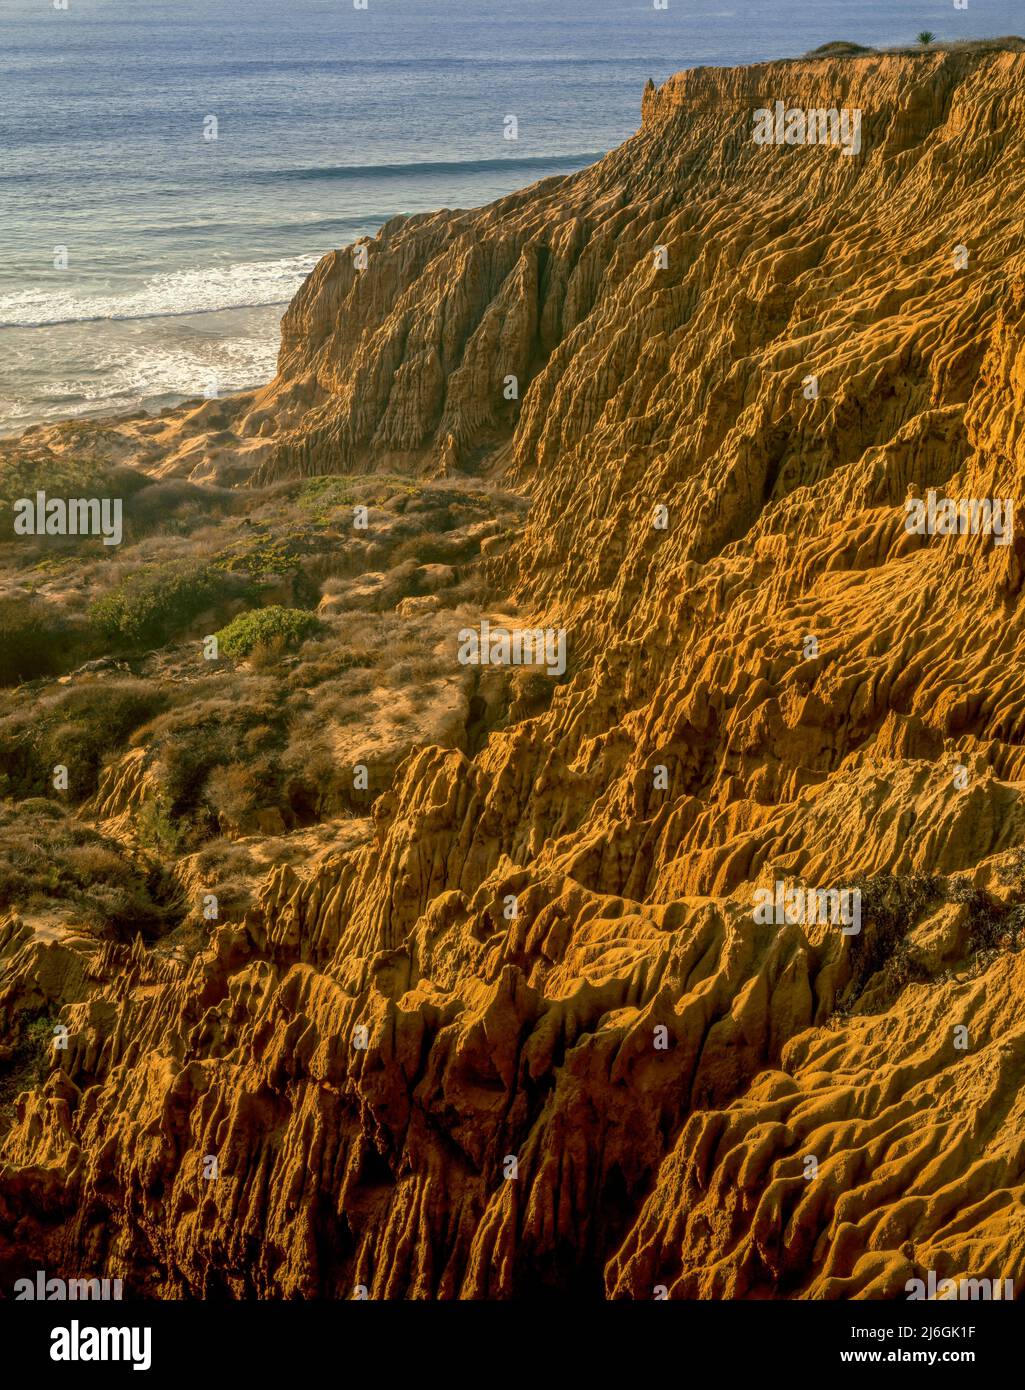 Sandstone Cliffs, Torrey Pines State Beach and State Reserve, La Jolla, San Diego County, California Stock Photo